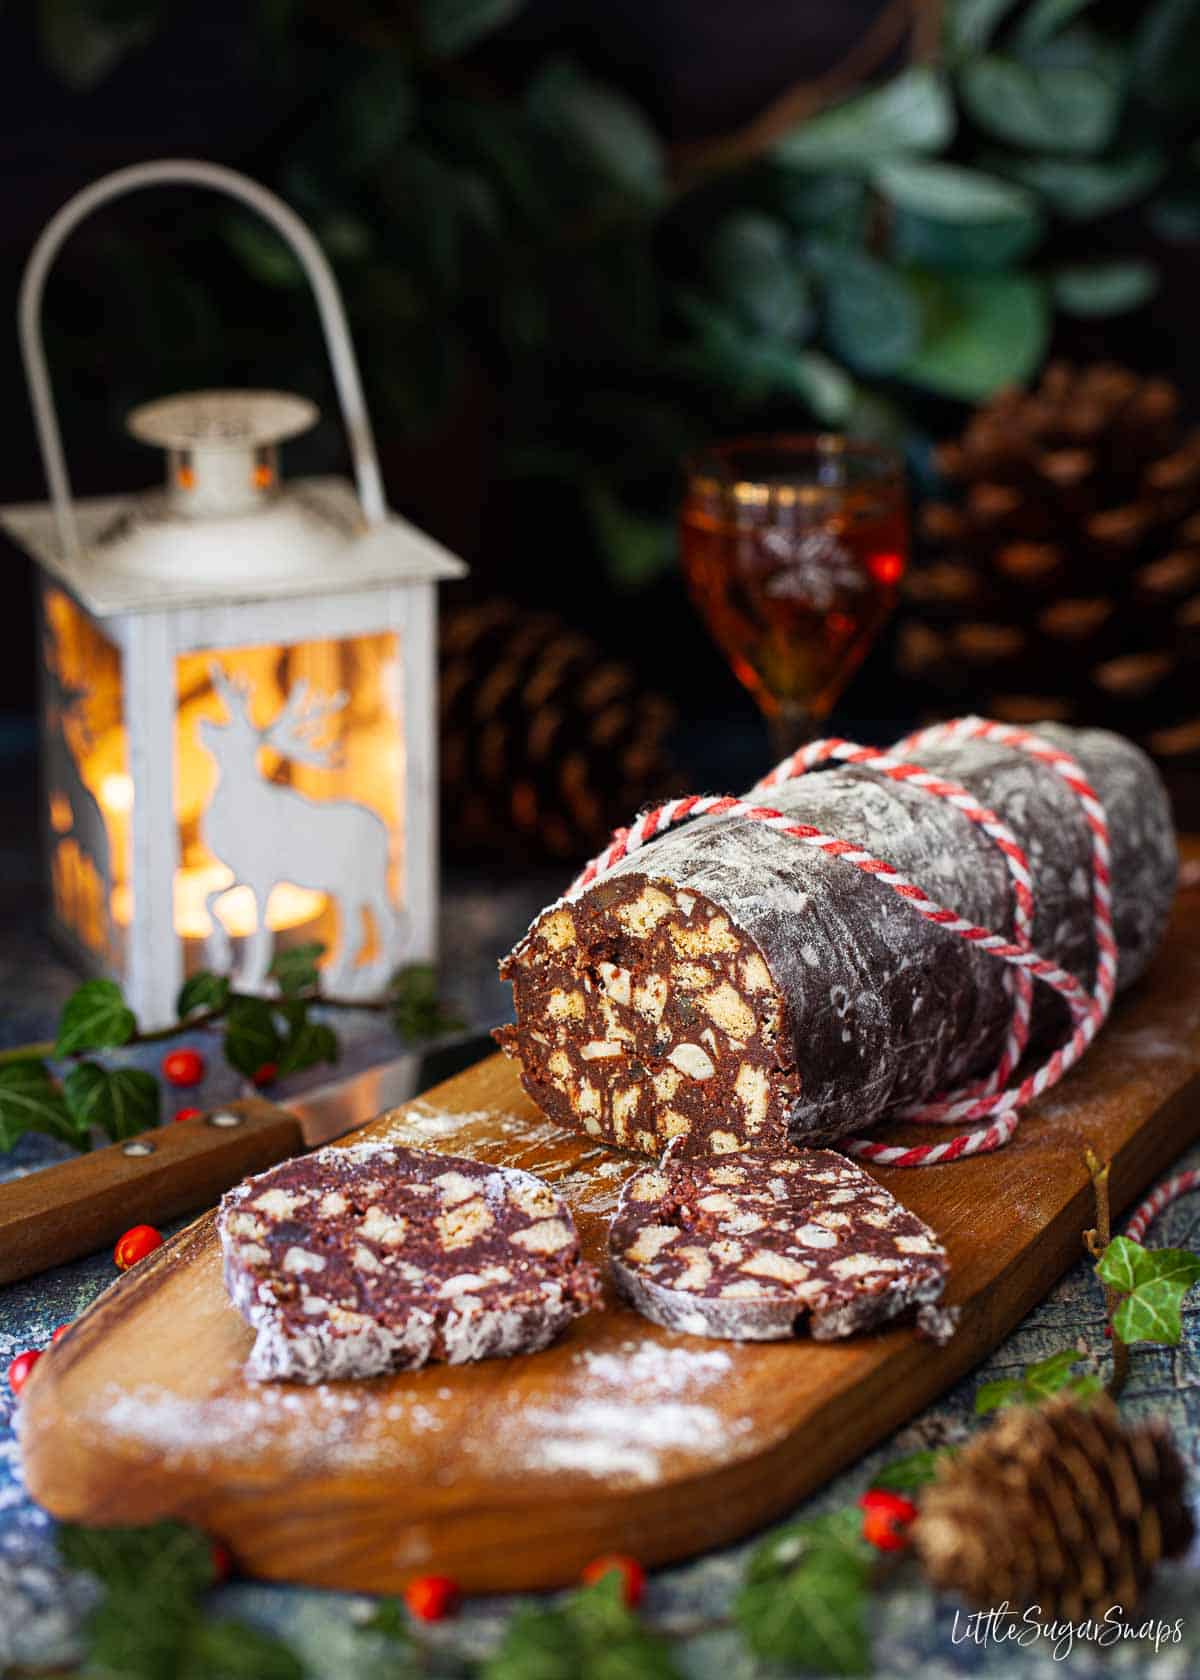 A chocolate salami sausage on a wooden board with a few slices cut off.